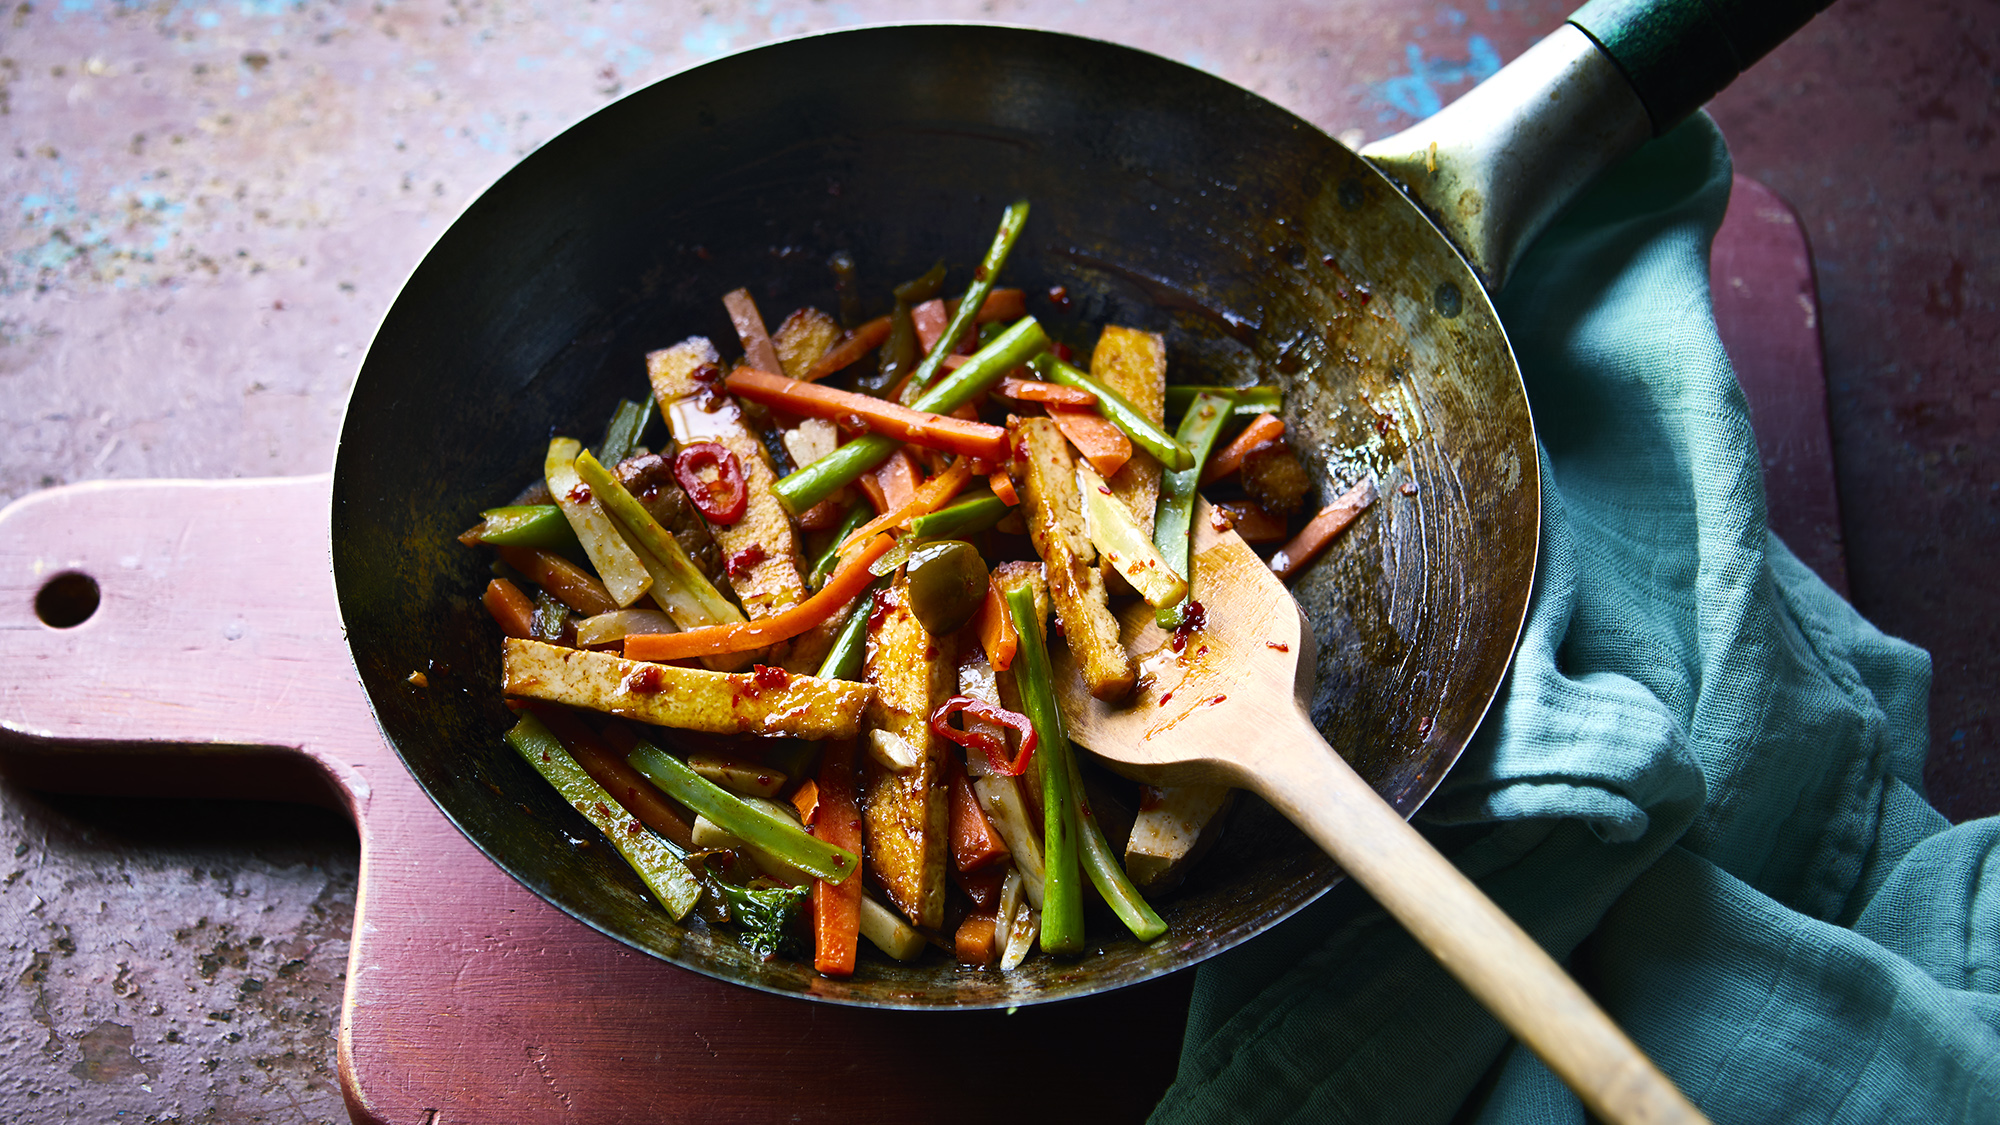 5 Tips for Making the Perfect Stir-Fry